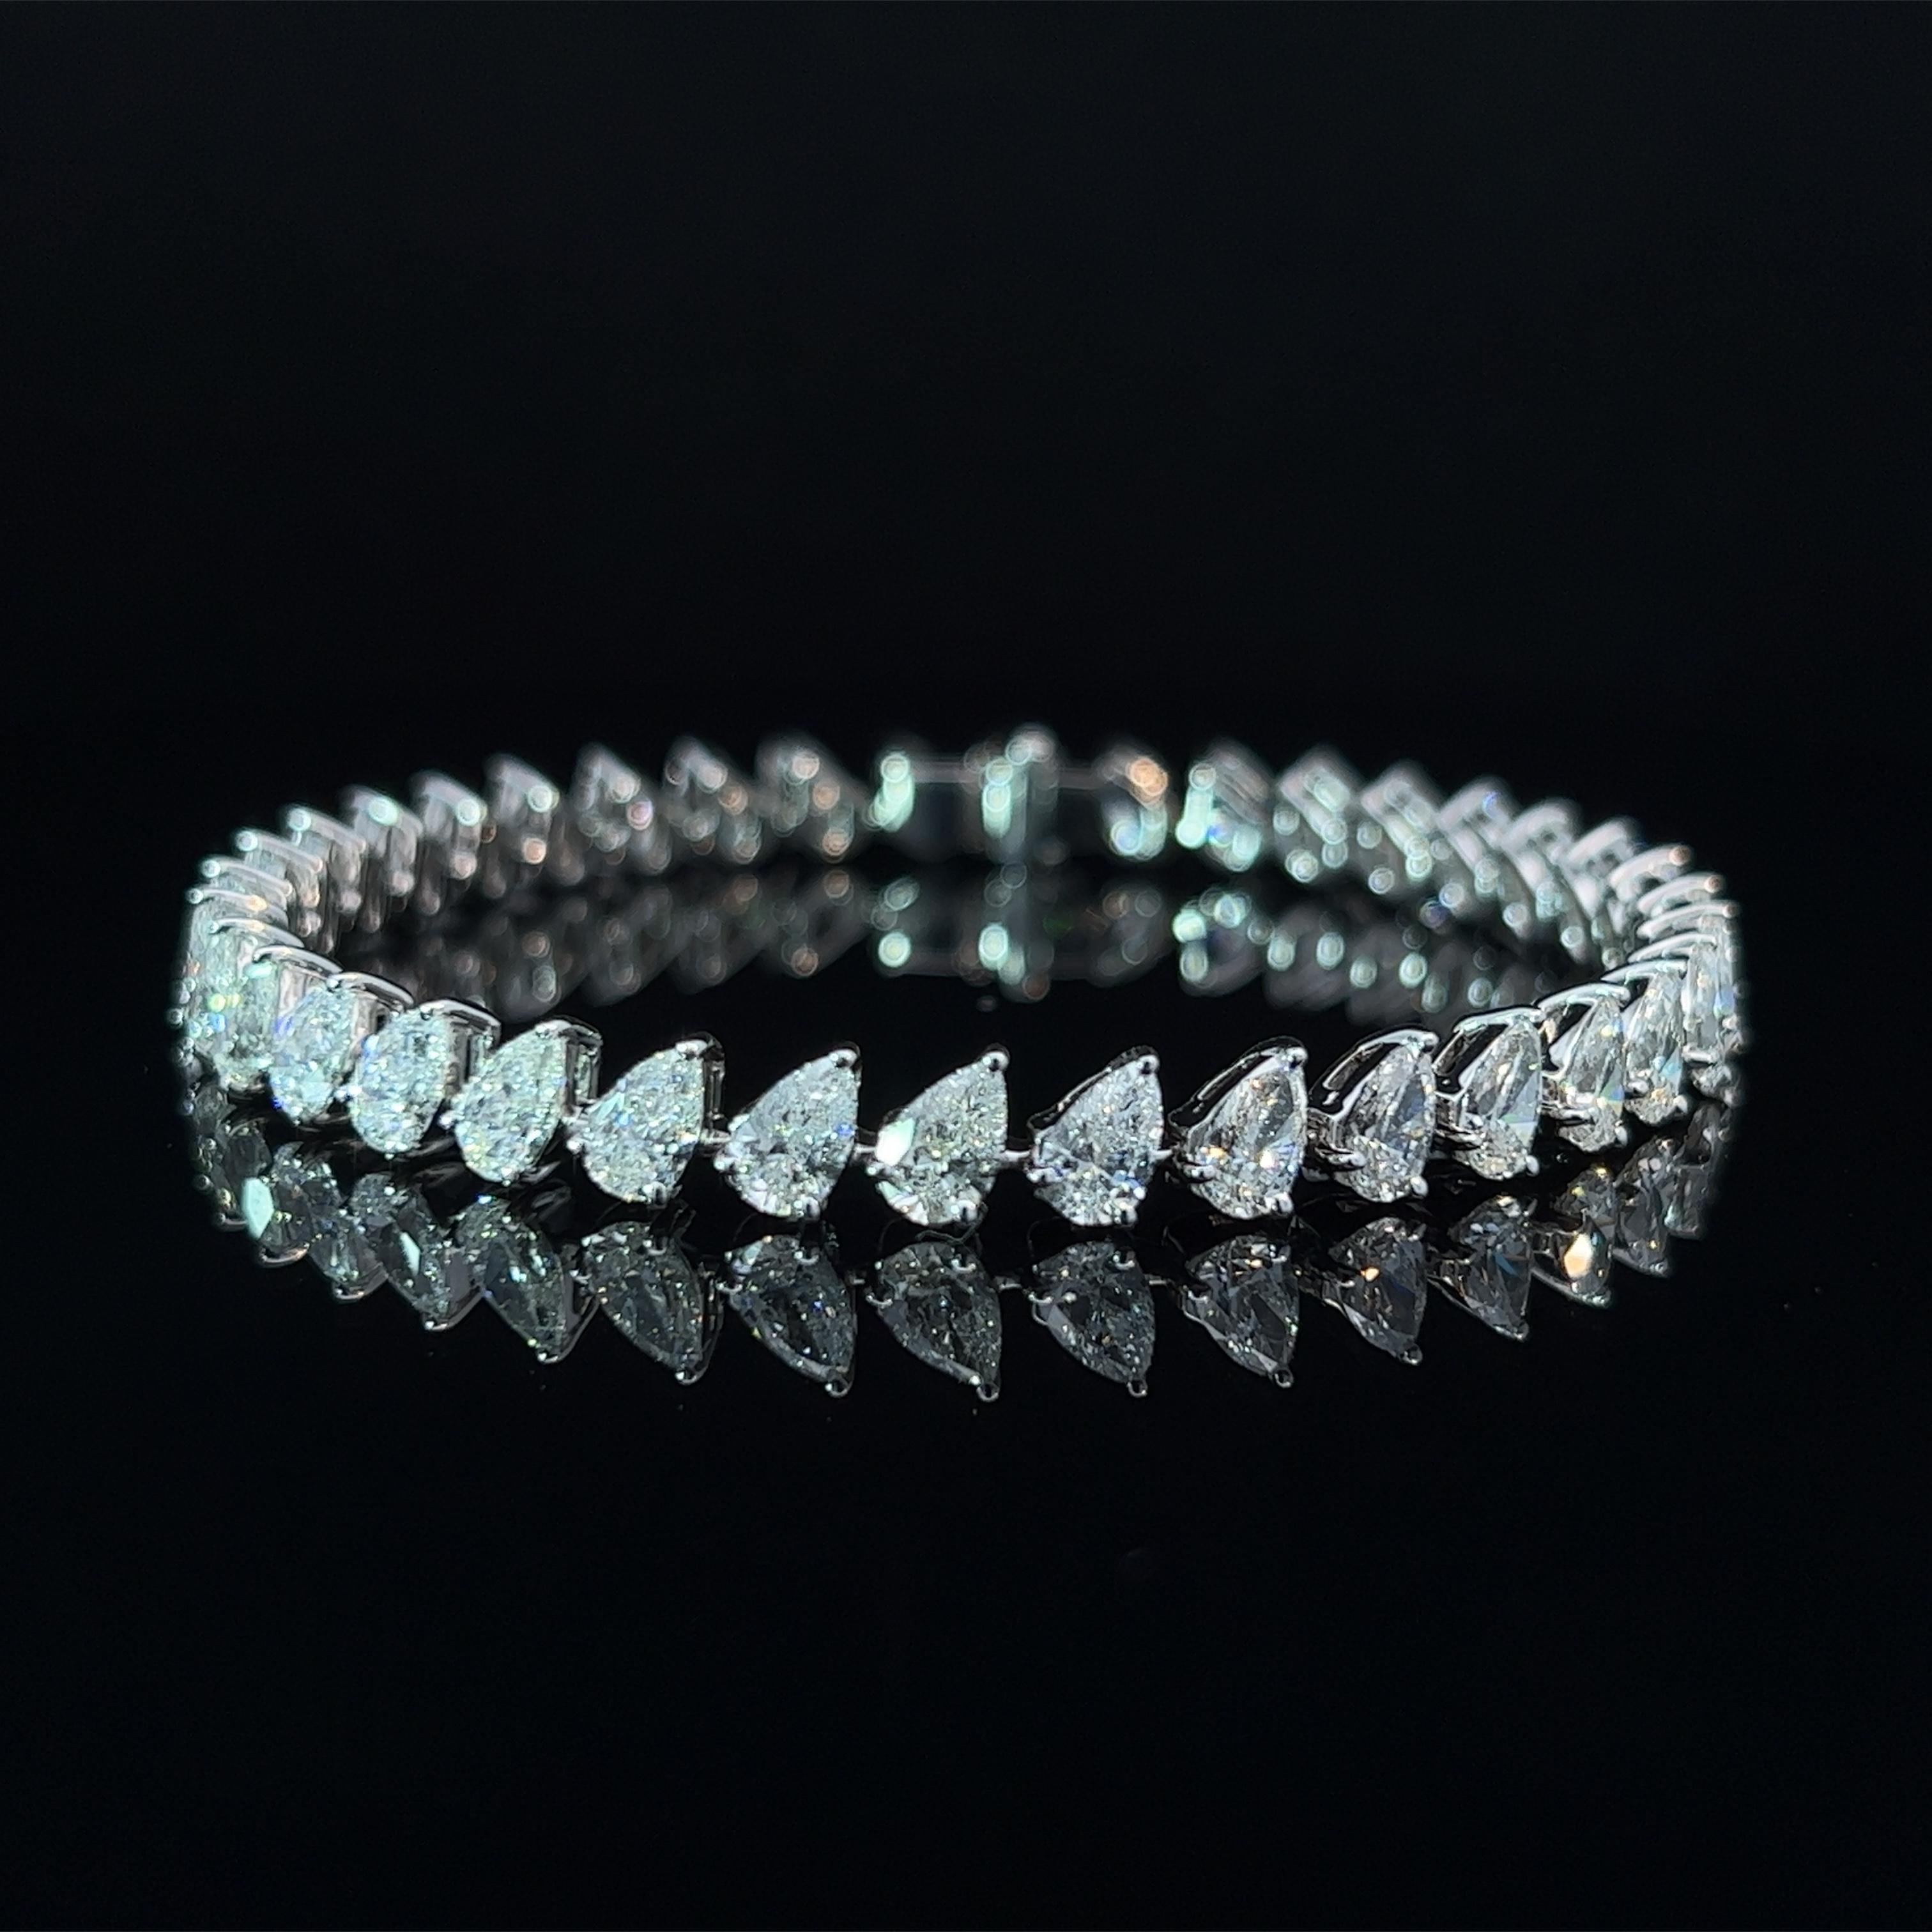 Diamond Shape: Pear Cut  
Total Diamond Weight: 11.36ct
Individual Diamond Weight: .33ct  
Color/Clarity: GH SI  
Metal: 18K White Gold 
Metal Weight: 14.78g

Key Features:

Pear-Cut Diamonds: The centerpiece of this bracelet features a dazzling